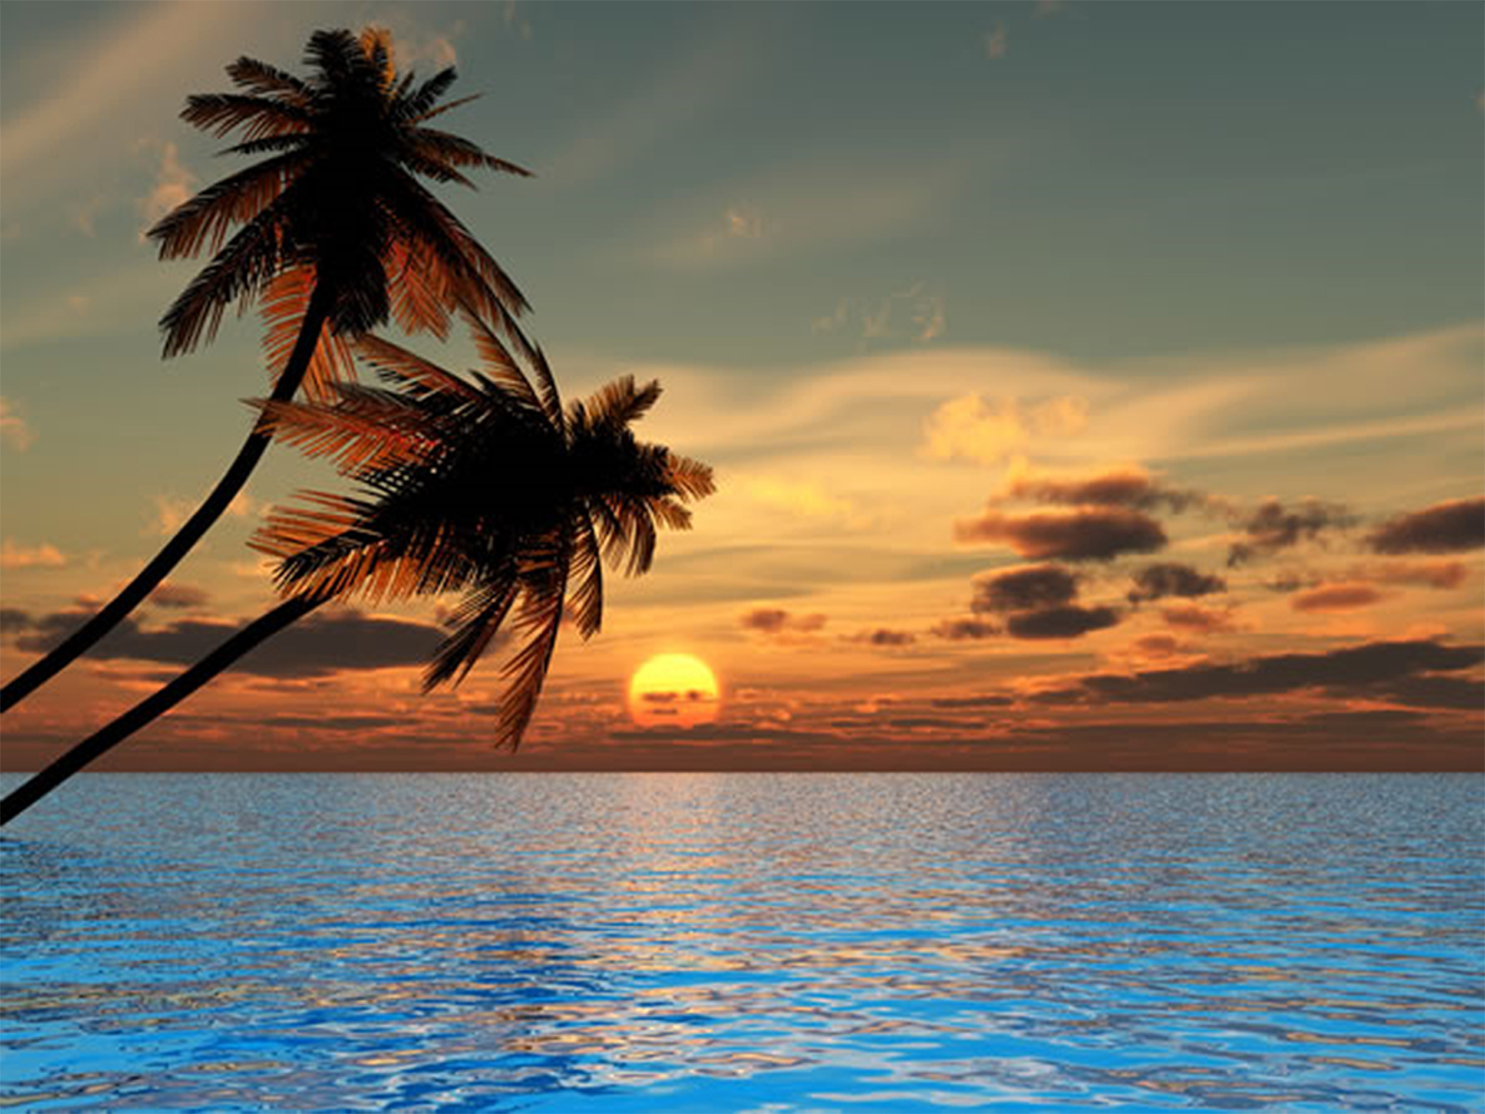 Sunset At Beach Cook Islands Gallery Yopriceville High